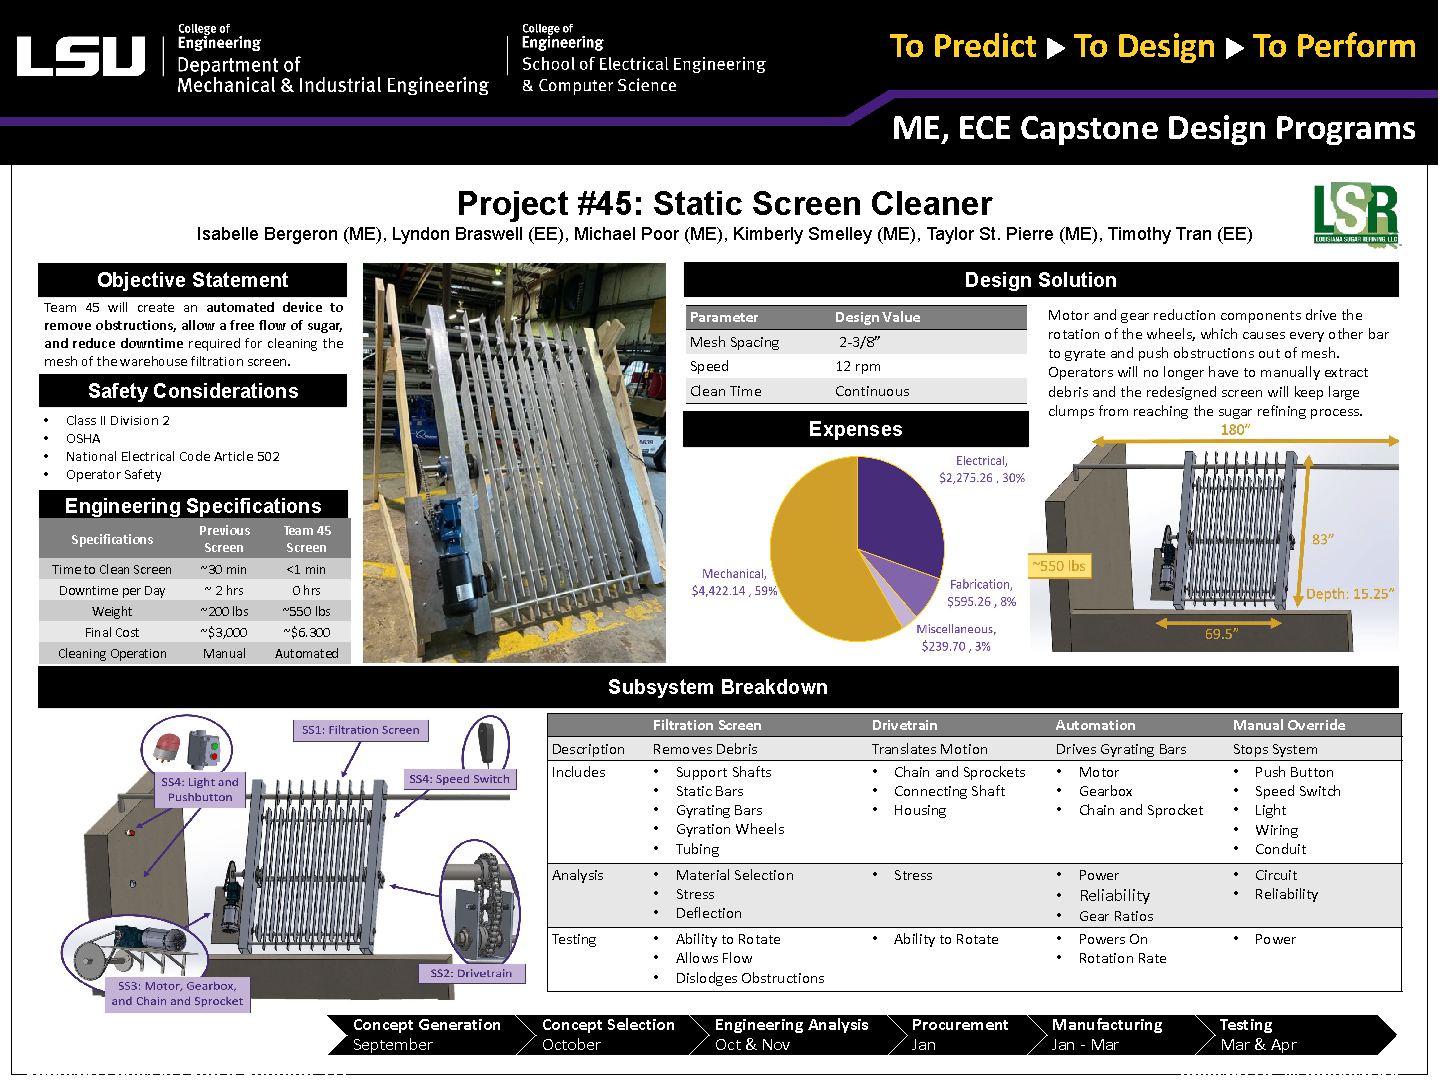 Project 45: Static Screen Cleaner (2021)